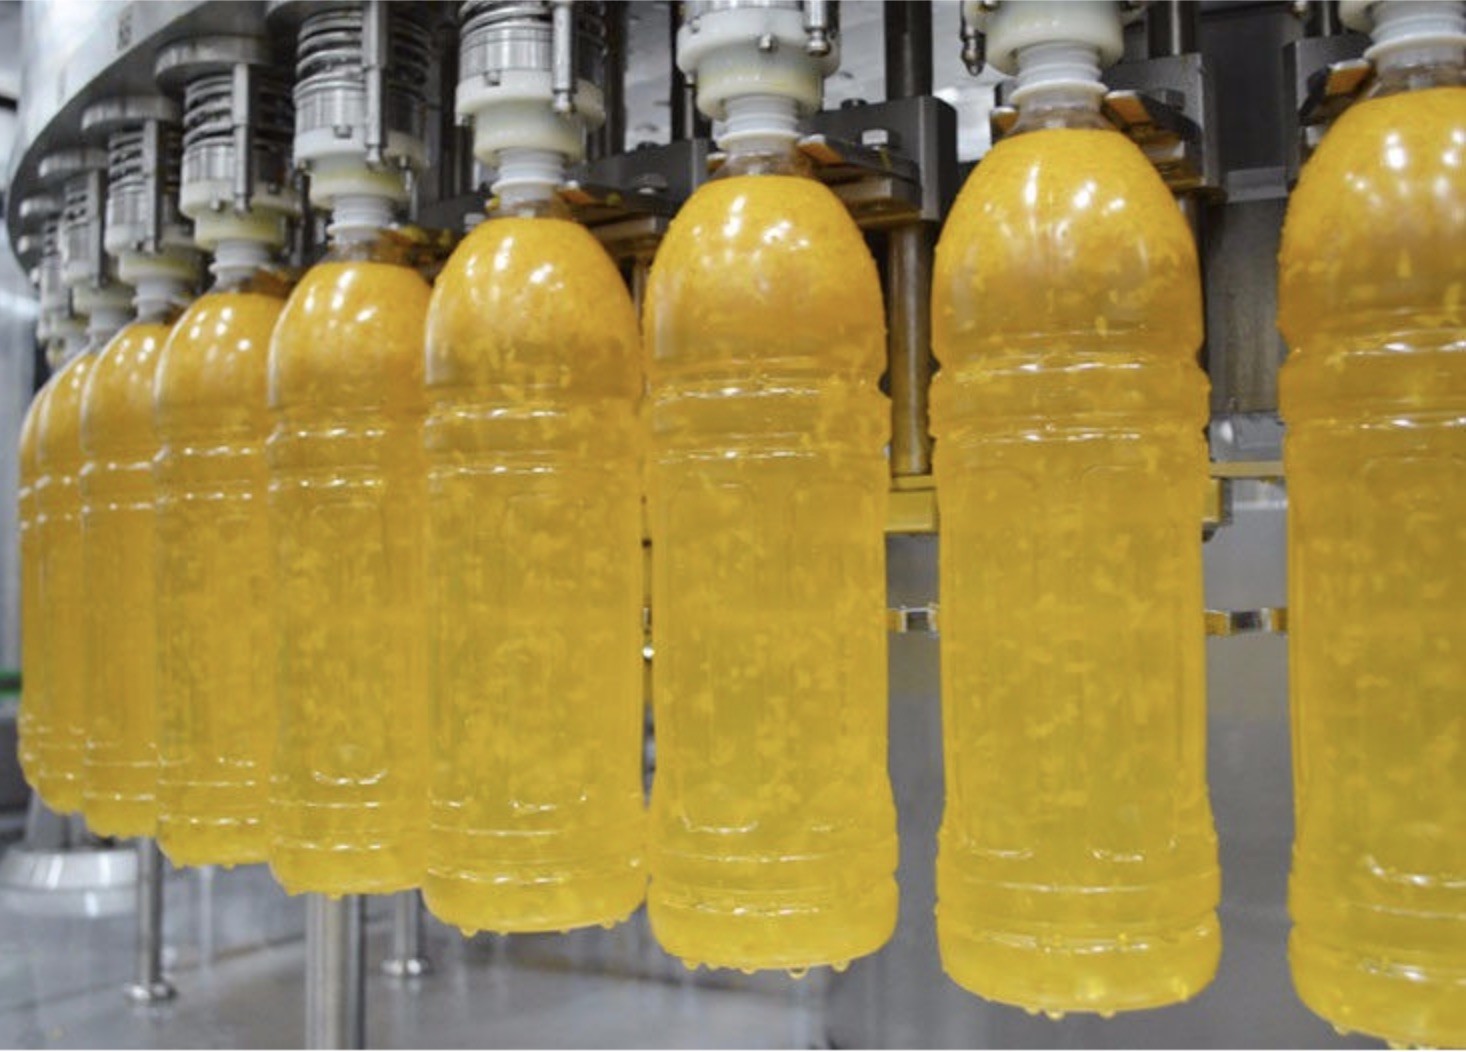 automatic bottle filling and closing machines - njm packaging